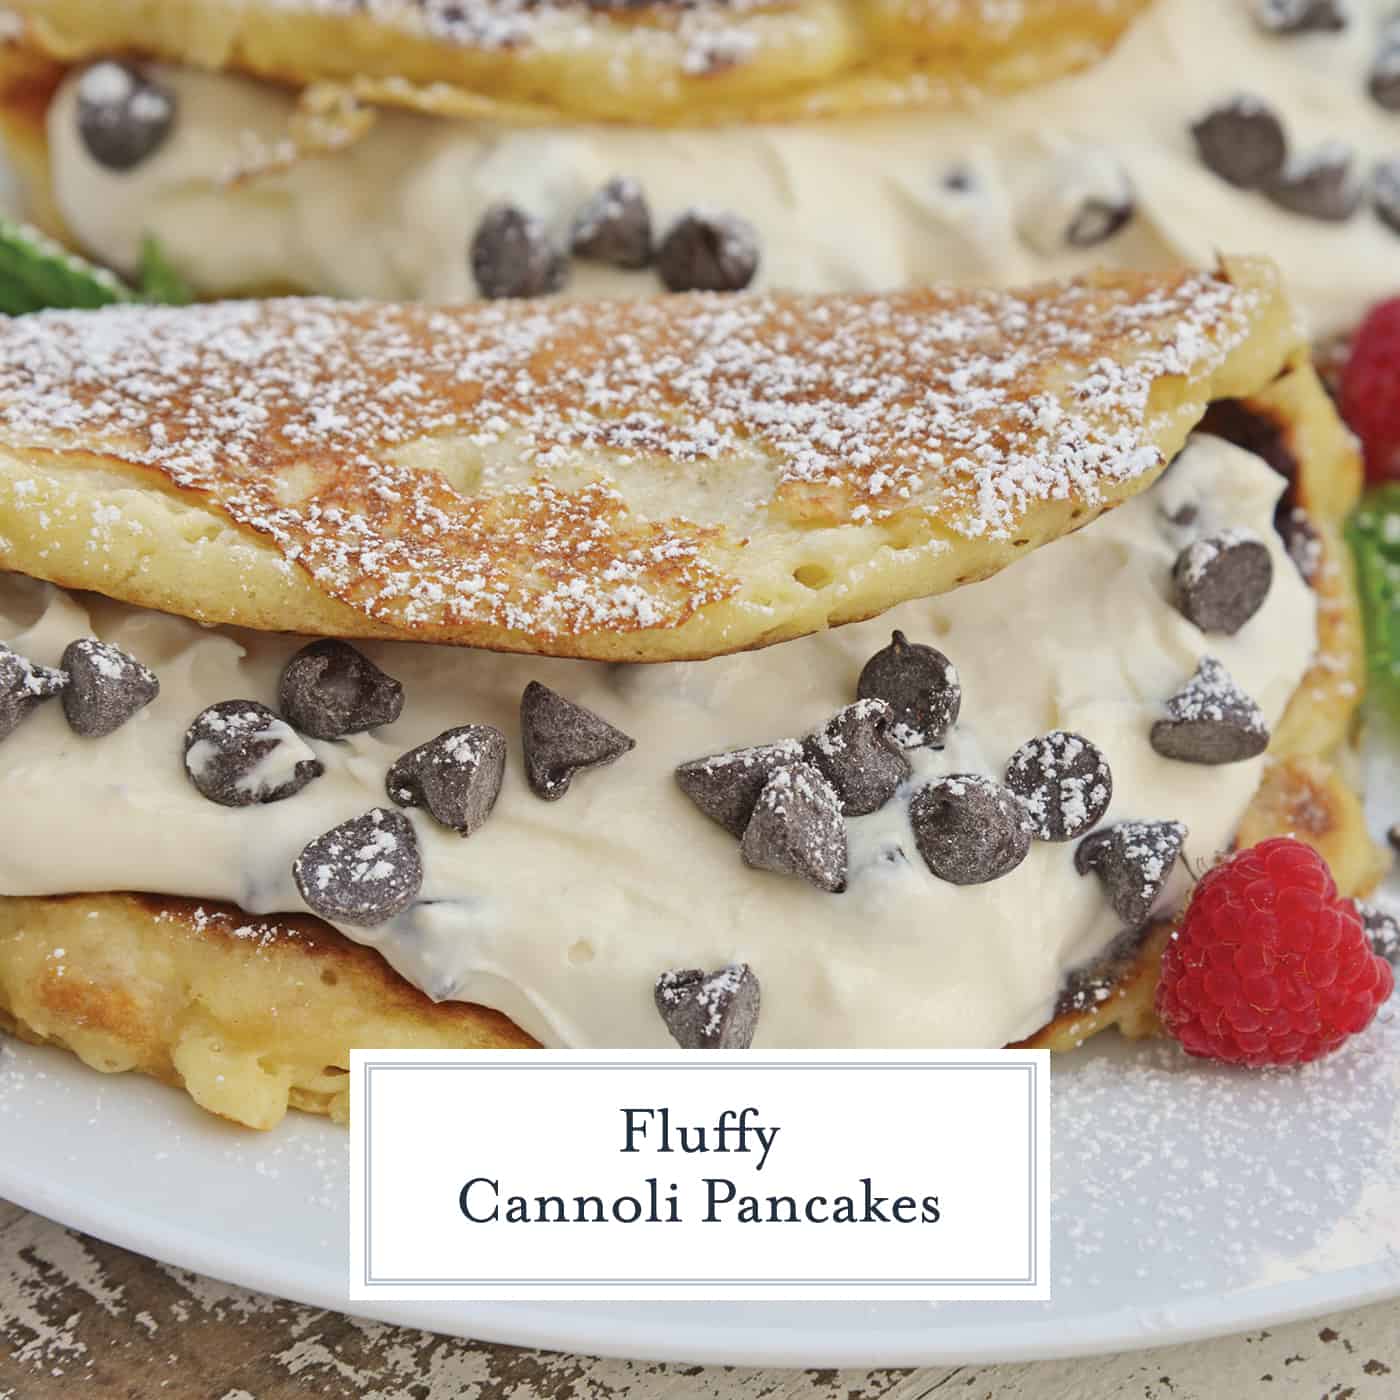 Pancakes stuffed with cream and mini chocolate chips.